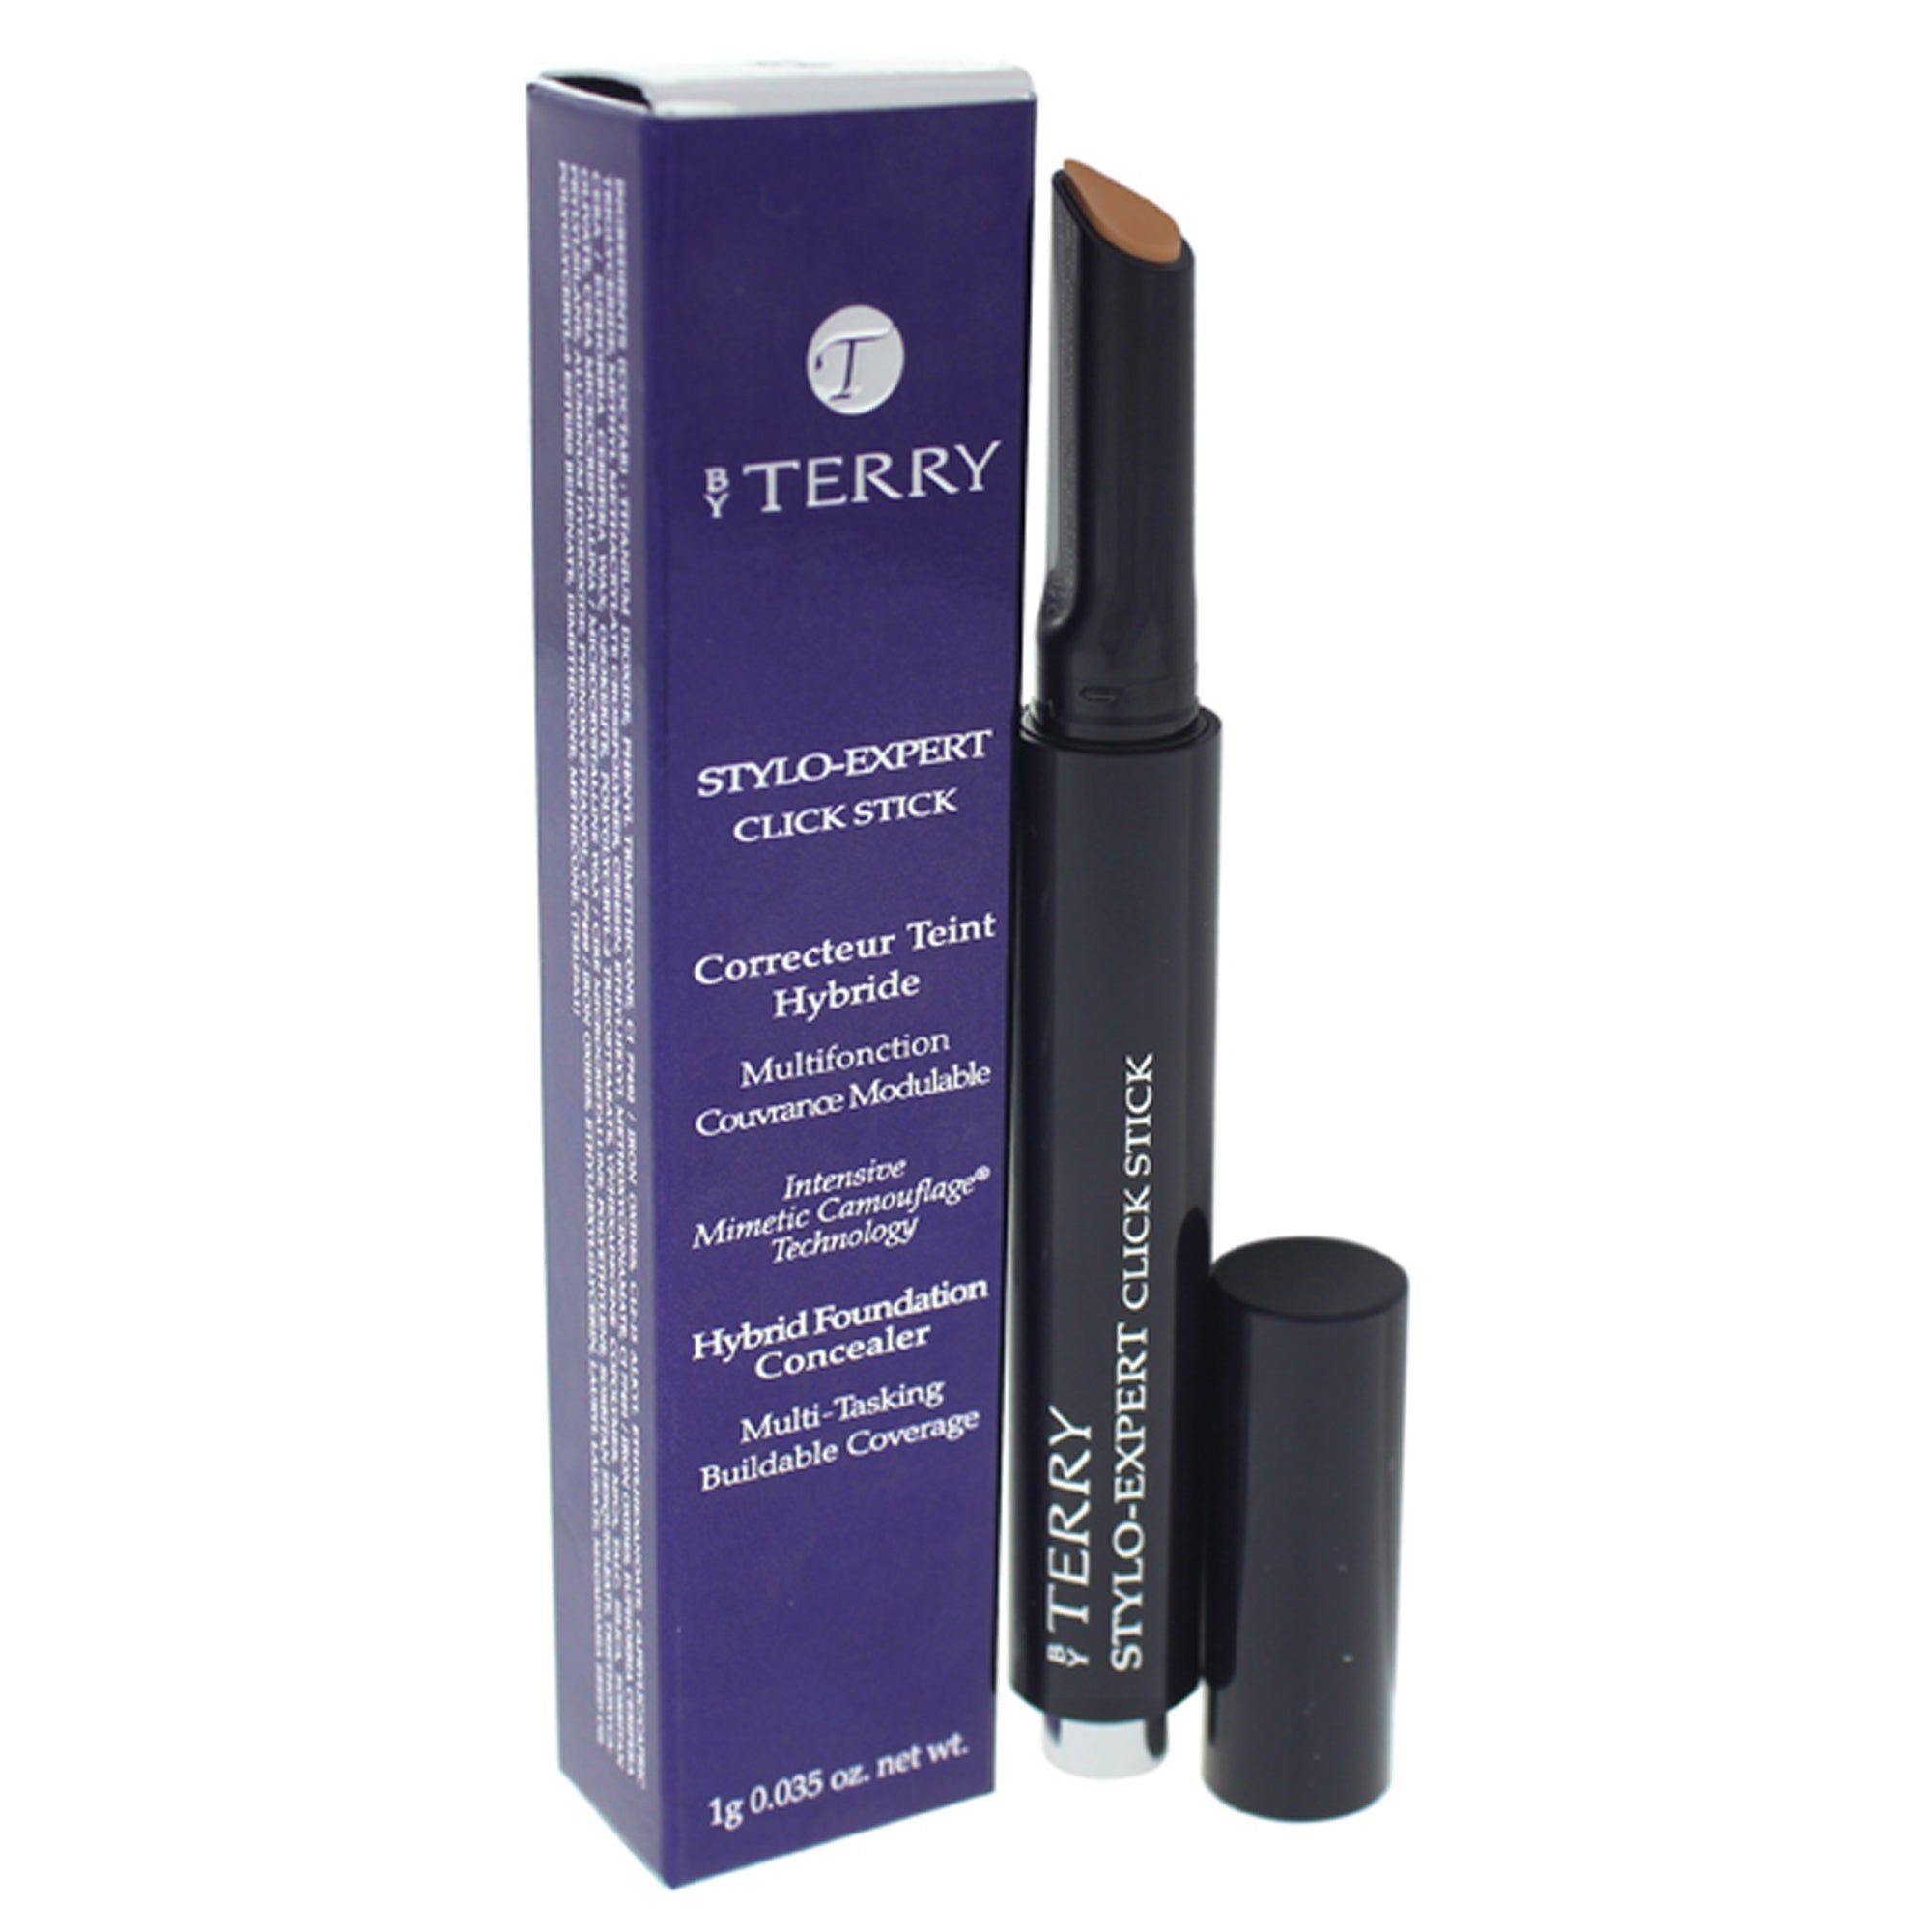 Stylo-Expert Click Stick Hybrid Foundation Concealer - # 10.5 Light Copper by By Terry for Women - 0.035 oz Concealer Small